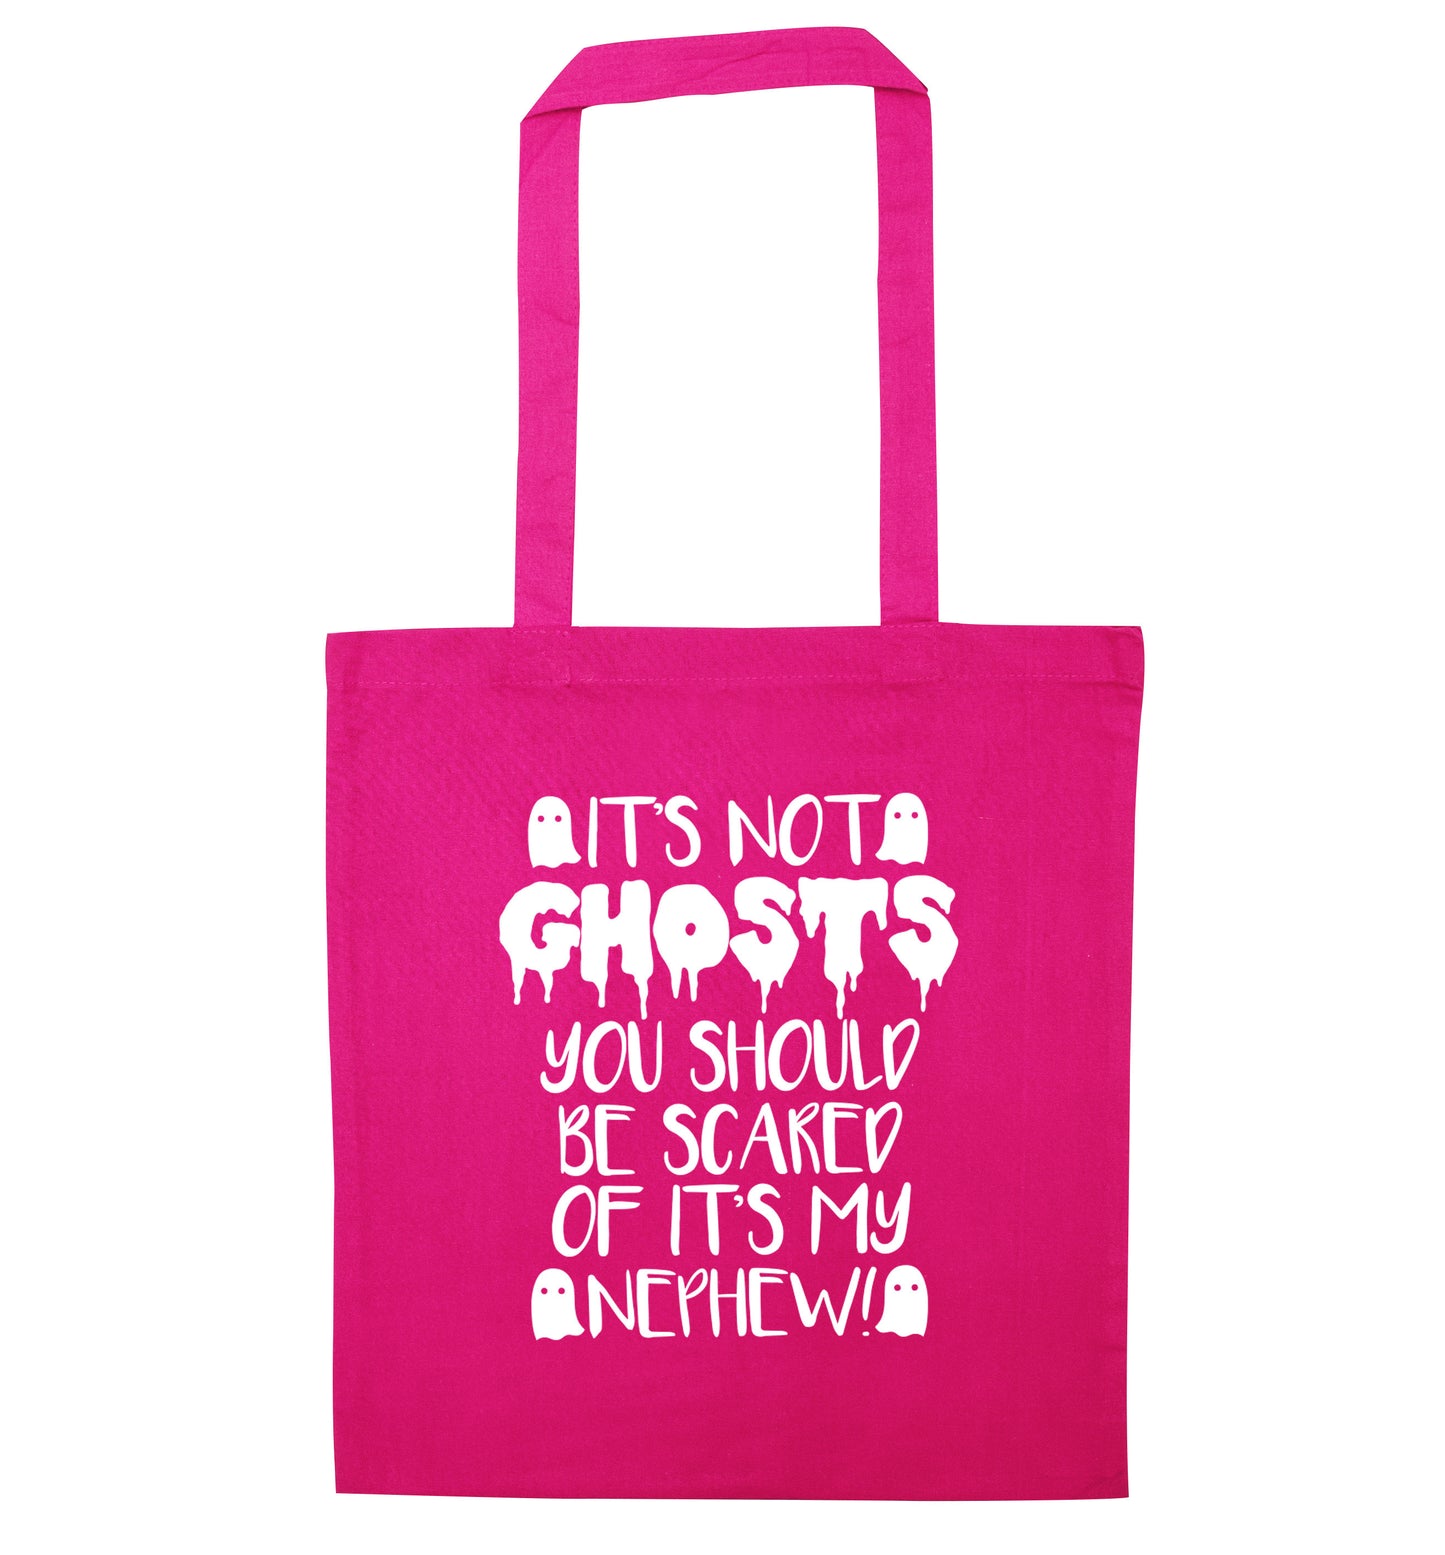 It's not ghosts you should be scared of it's my nephew! pink tote bag